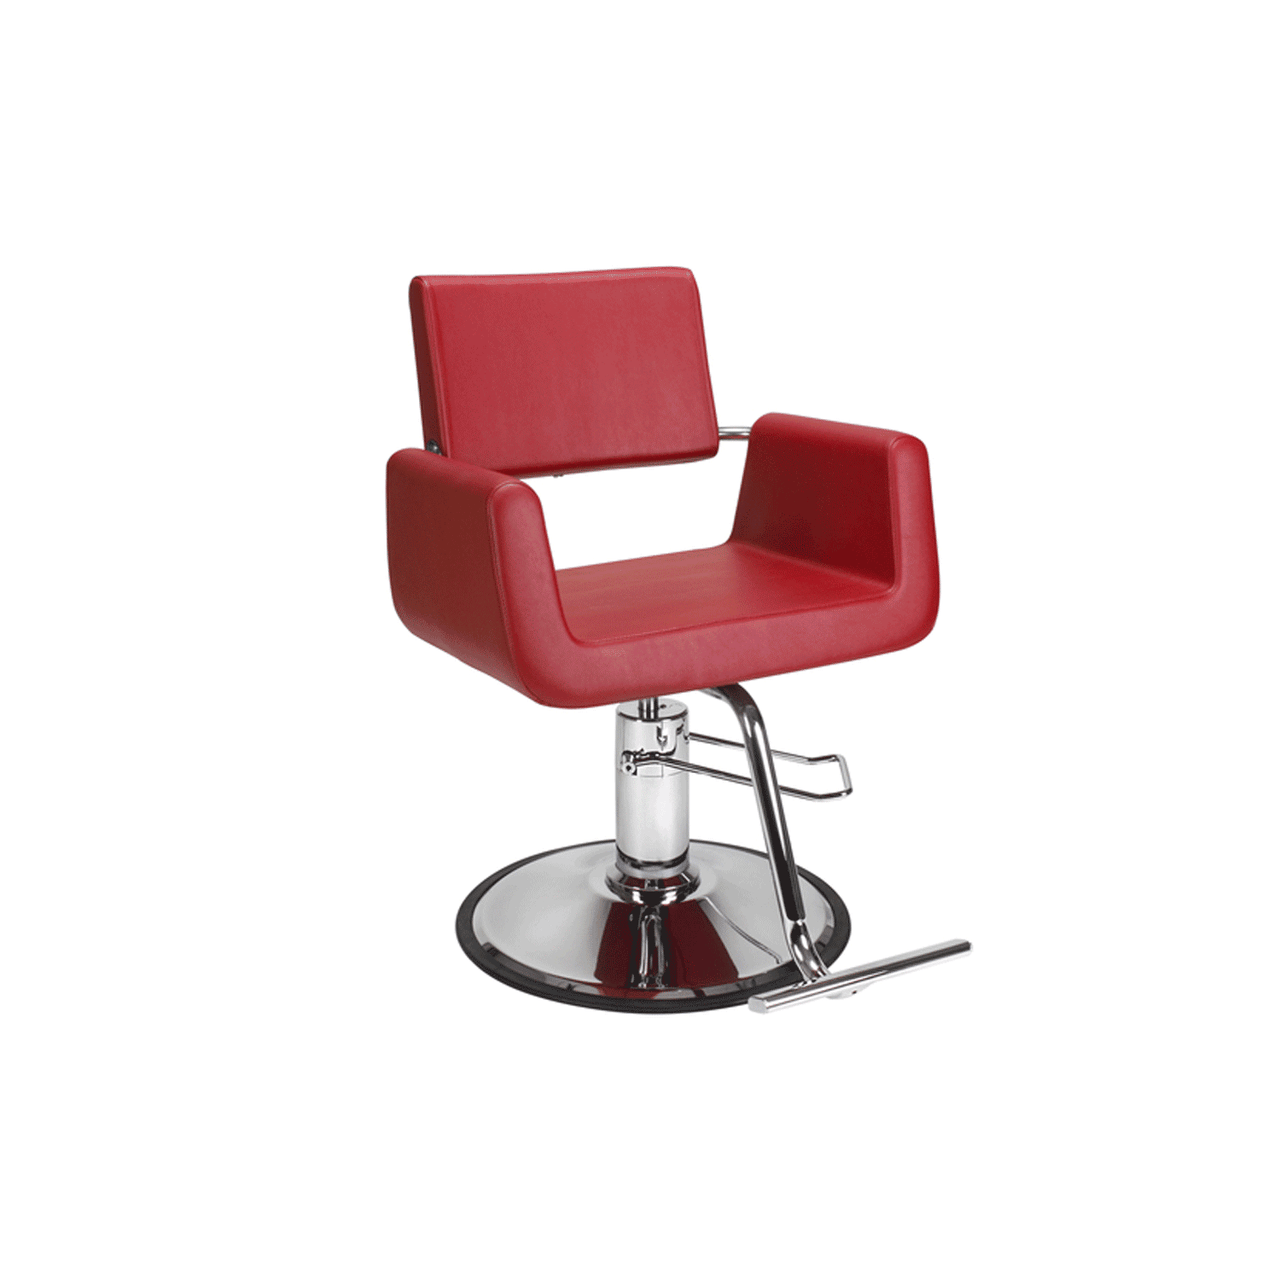 Berkeley Aron Styling Chair Red